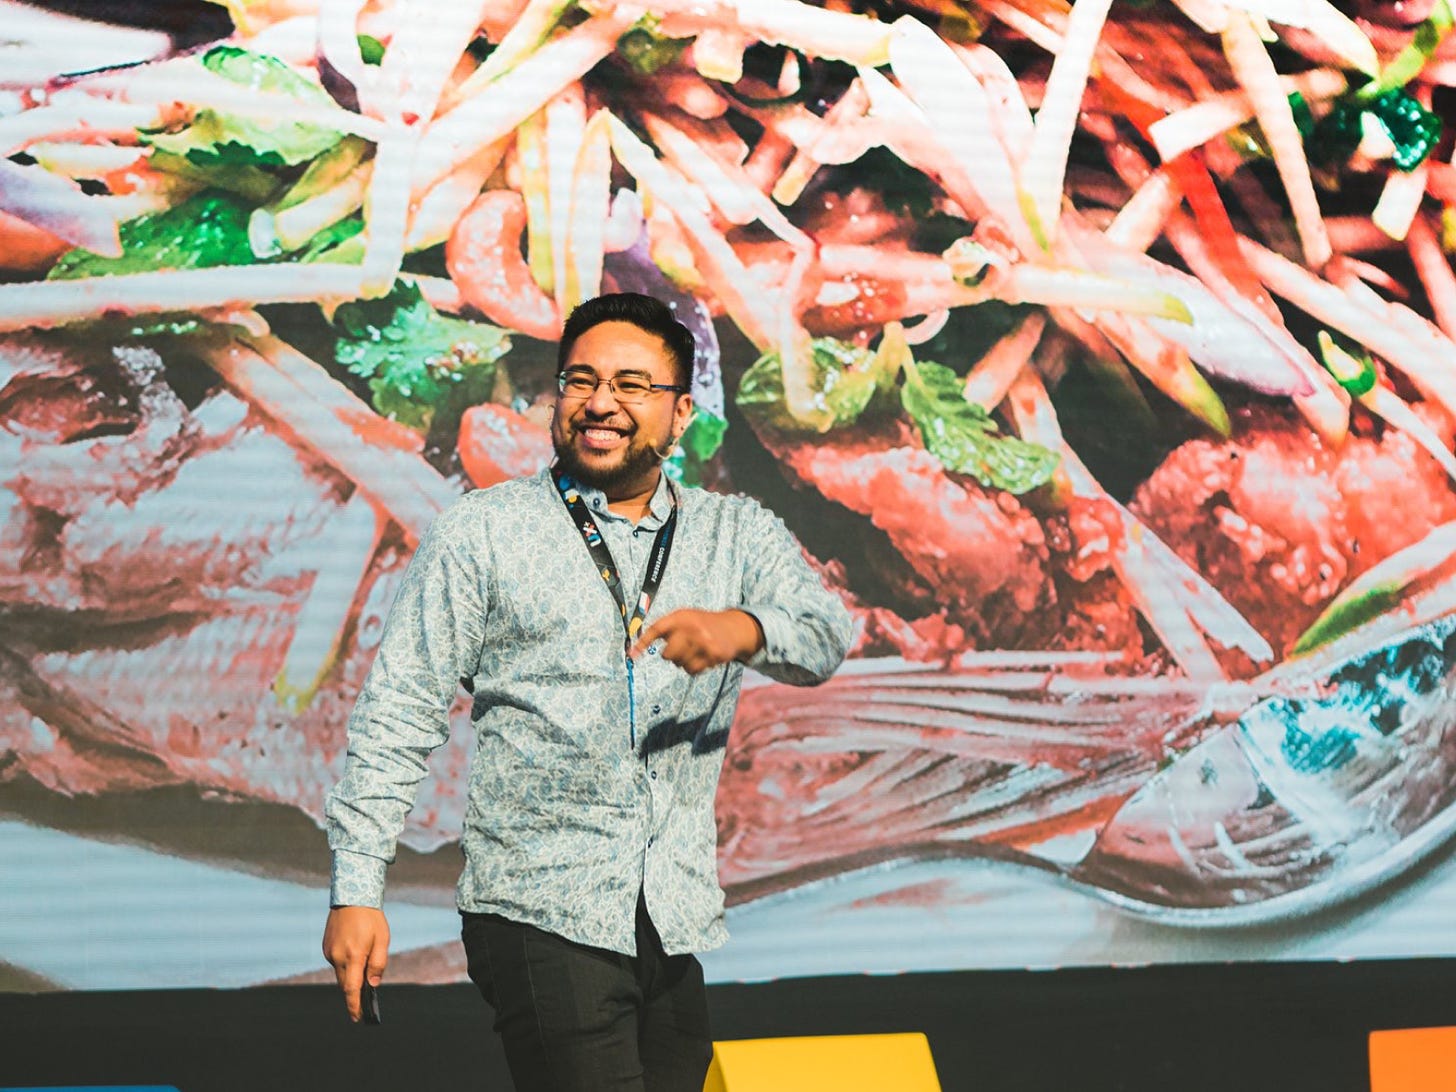 Jay Demetillo smiling and pointing on stage at the UX+ conference in front of a giant photo of food.